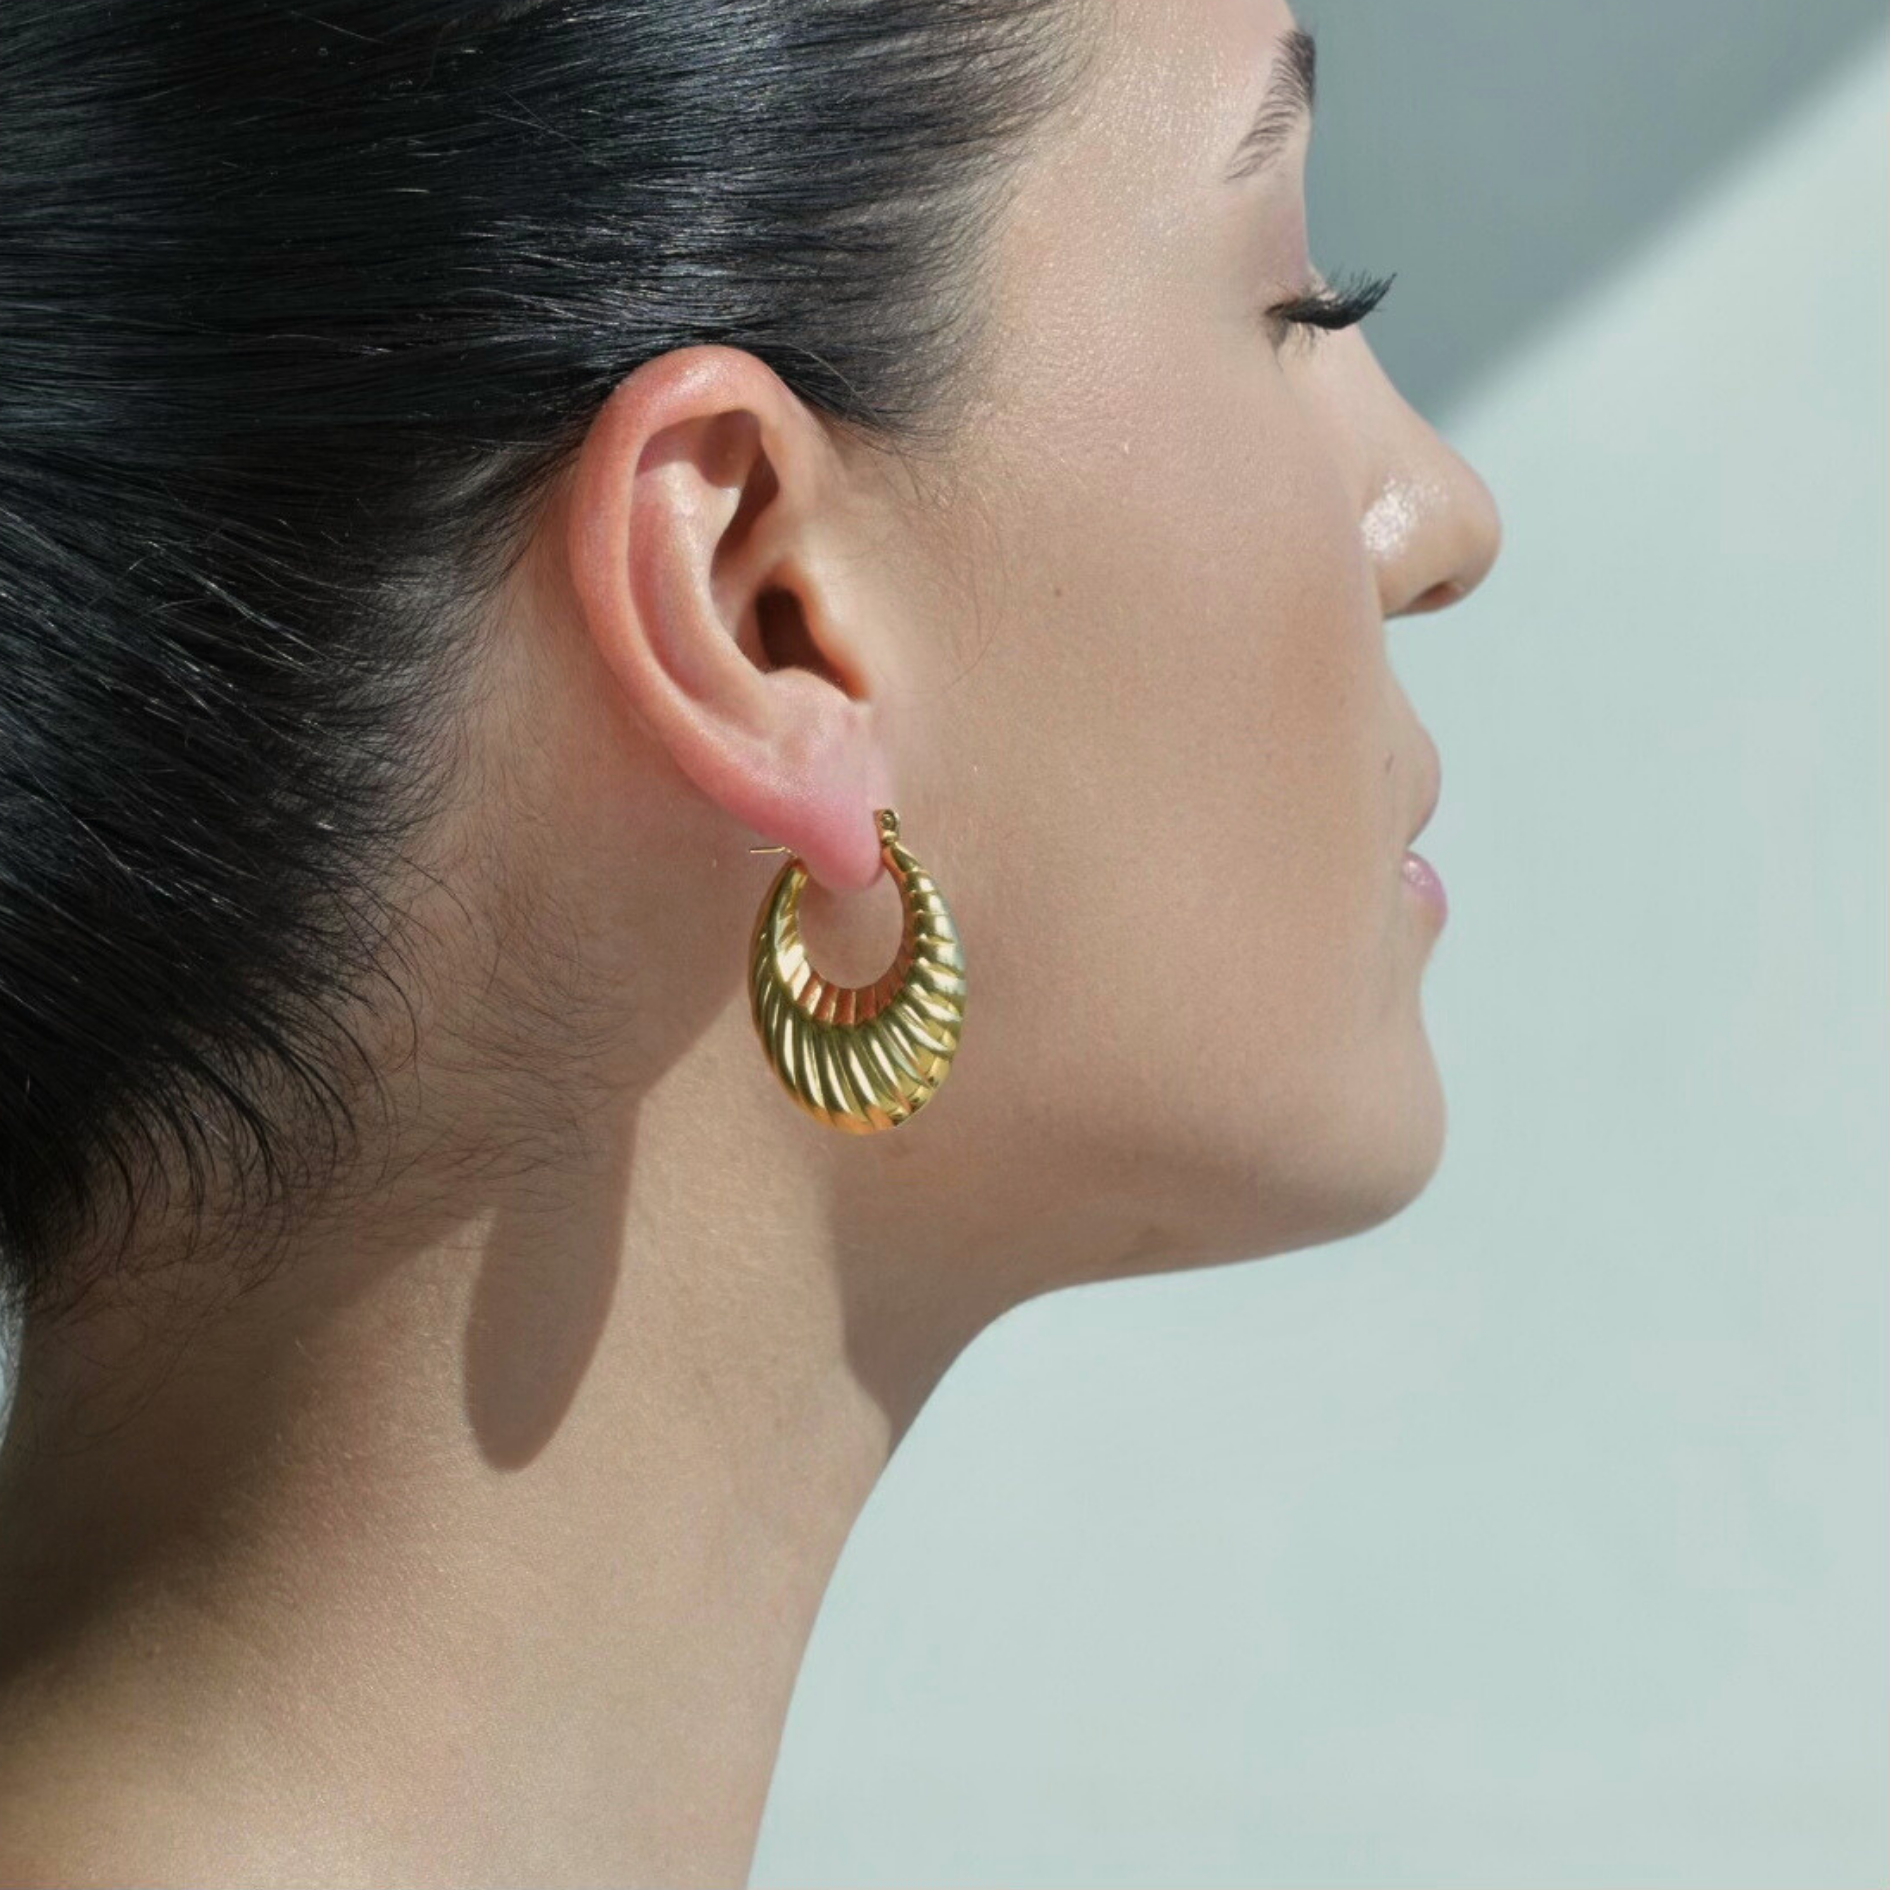  Oval shaped gold hoop earrings. Chunky look in the bottom part of the oval.